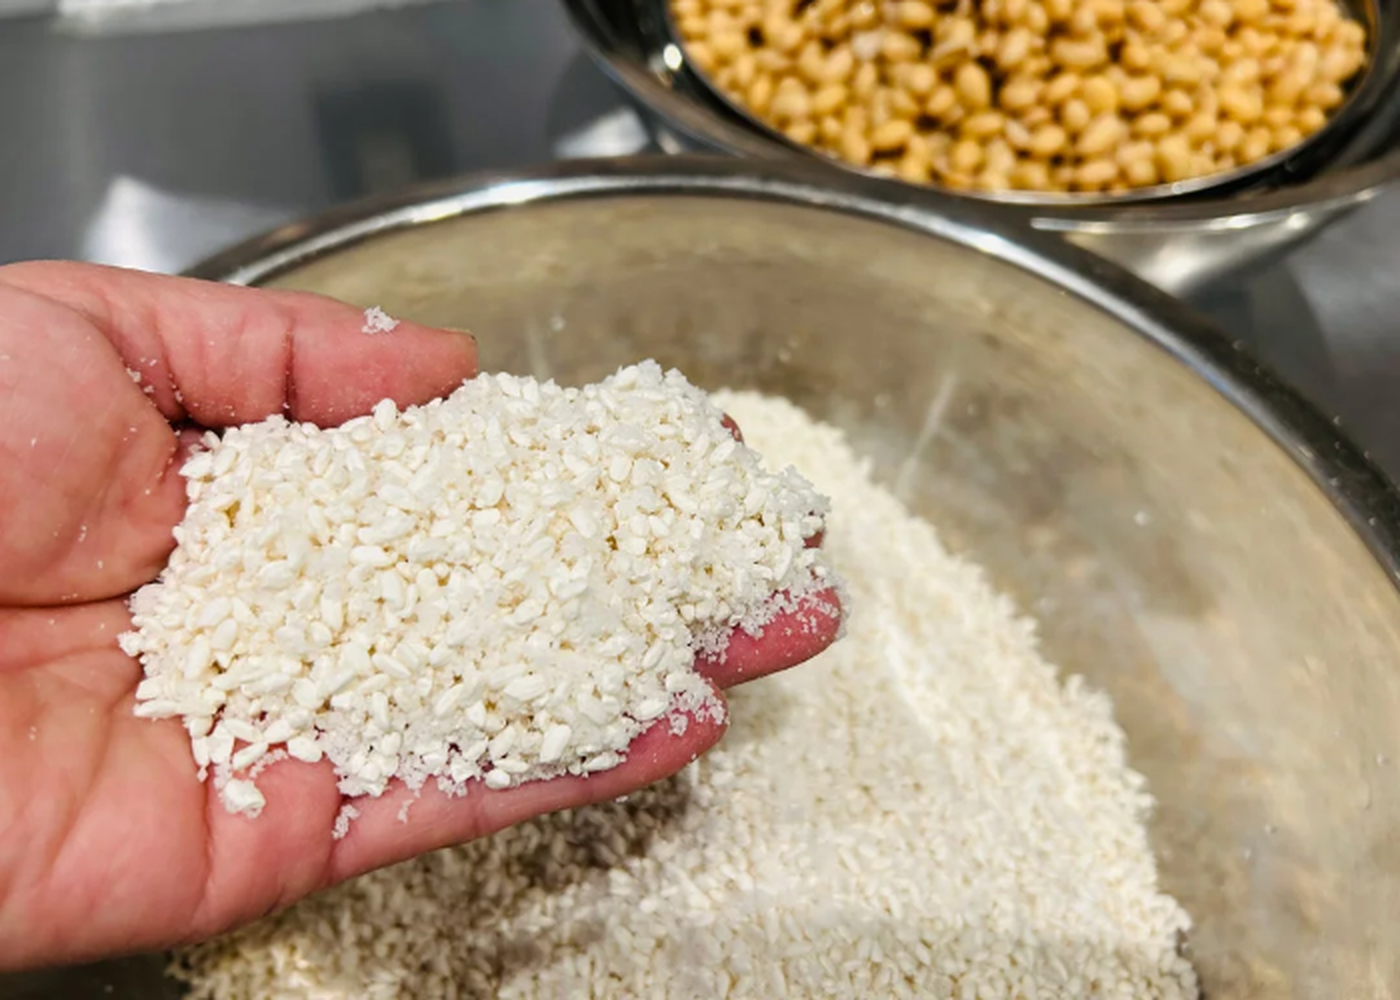 A hand reaches into a bowl of rice, preparing to make kome miso.